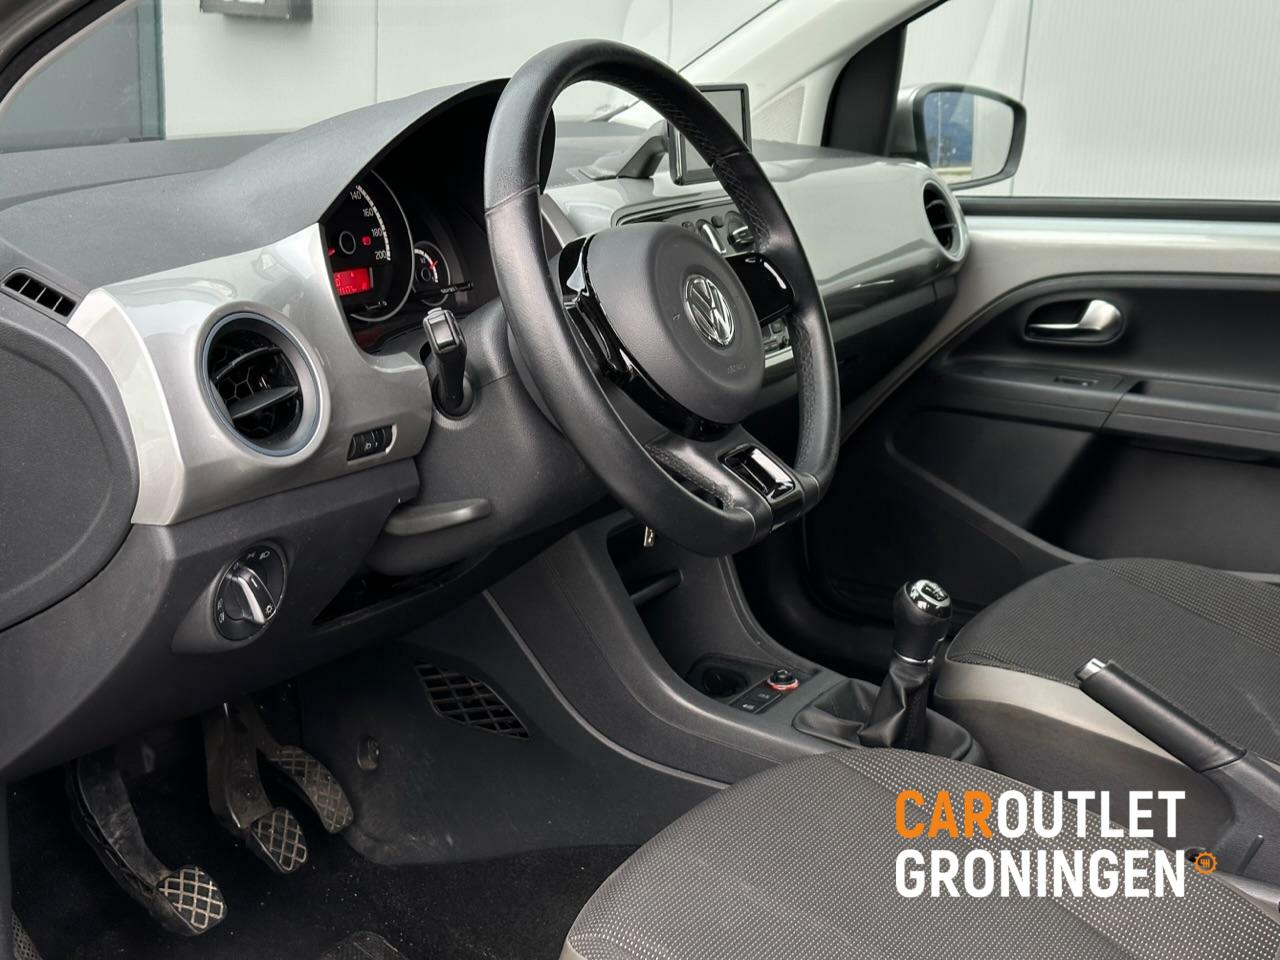 Caroutlet Groningen - Volkswagen Up! 1.0 high up! BlueMotion| CRUISE | CNG | AIRCO